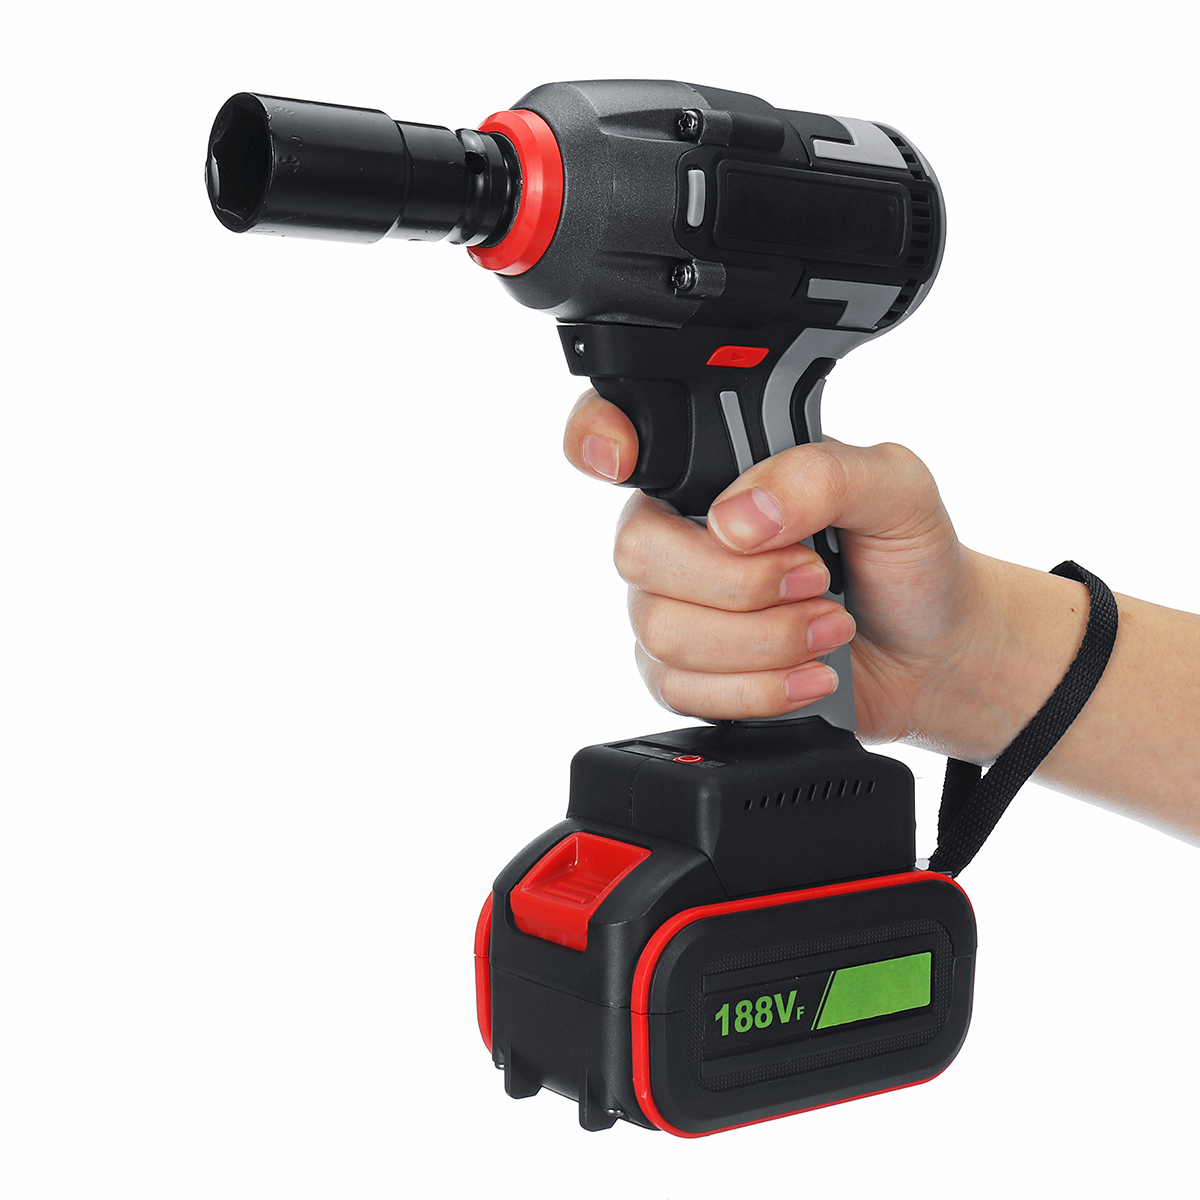 100-240V-Torque-450NM-Electric-Impact-Wrench-Cordless-Motor-Brushless-Rattle-Driver-1444636-8